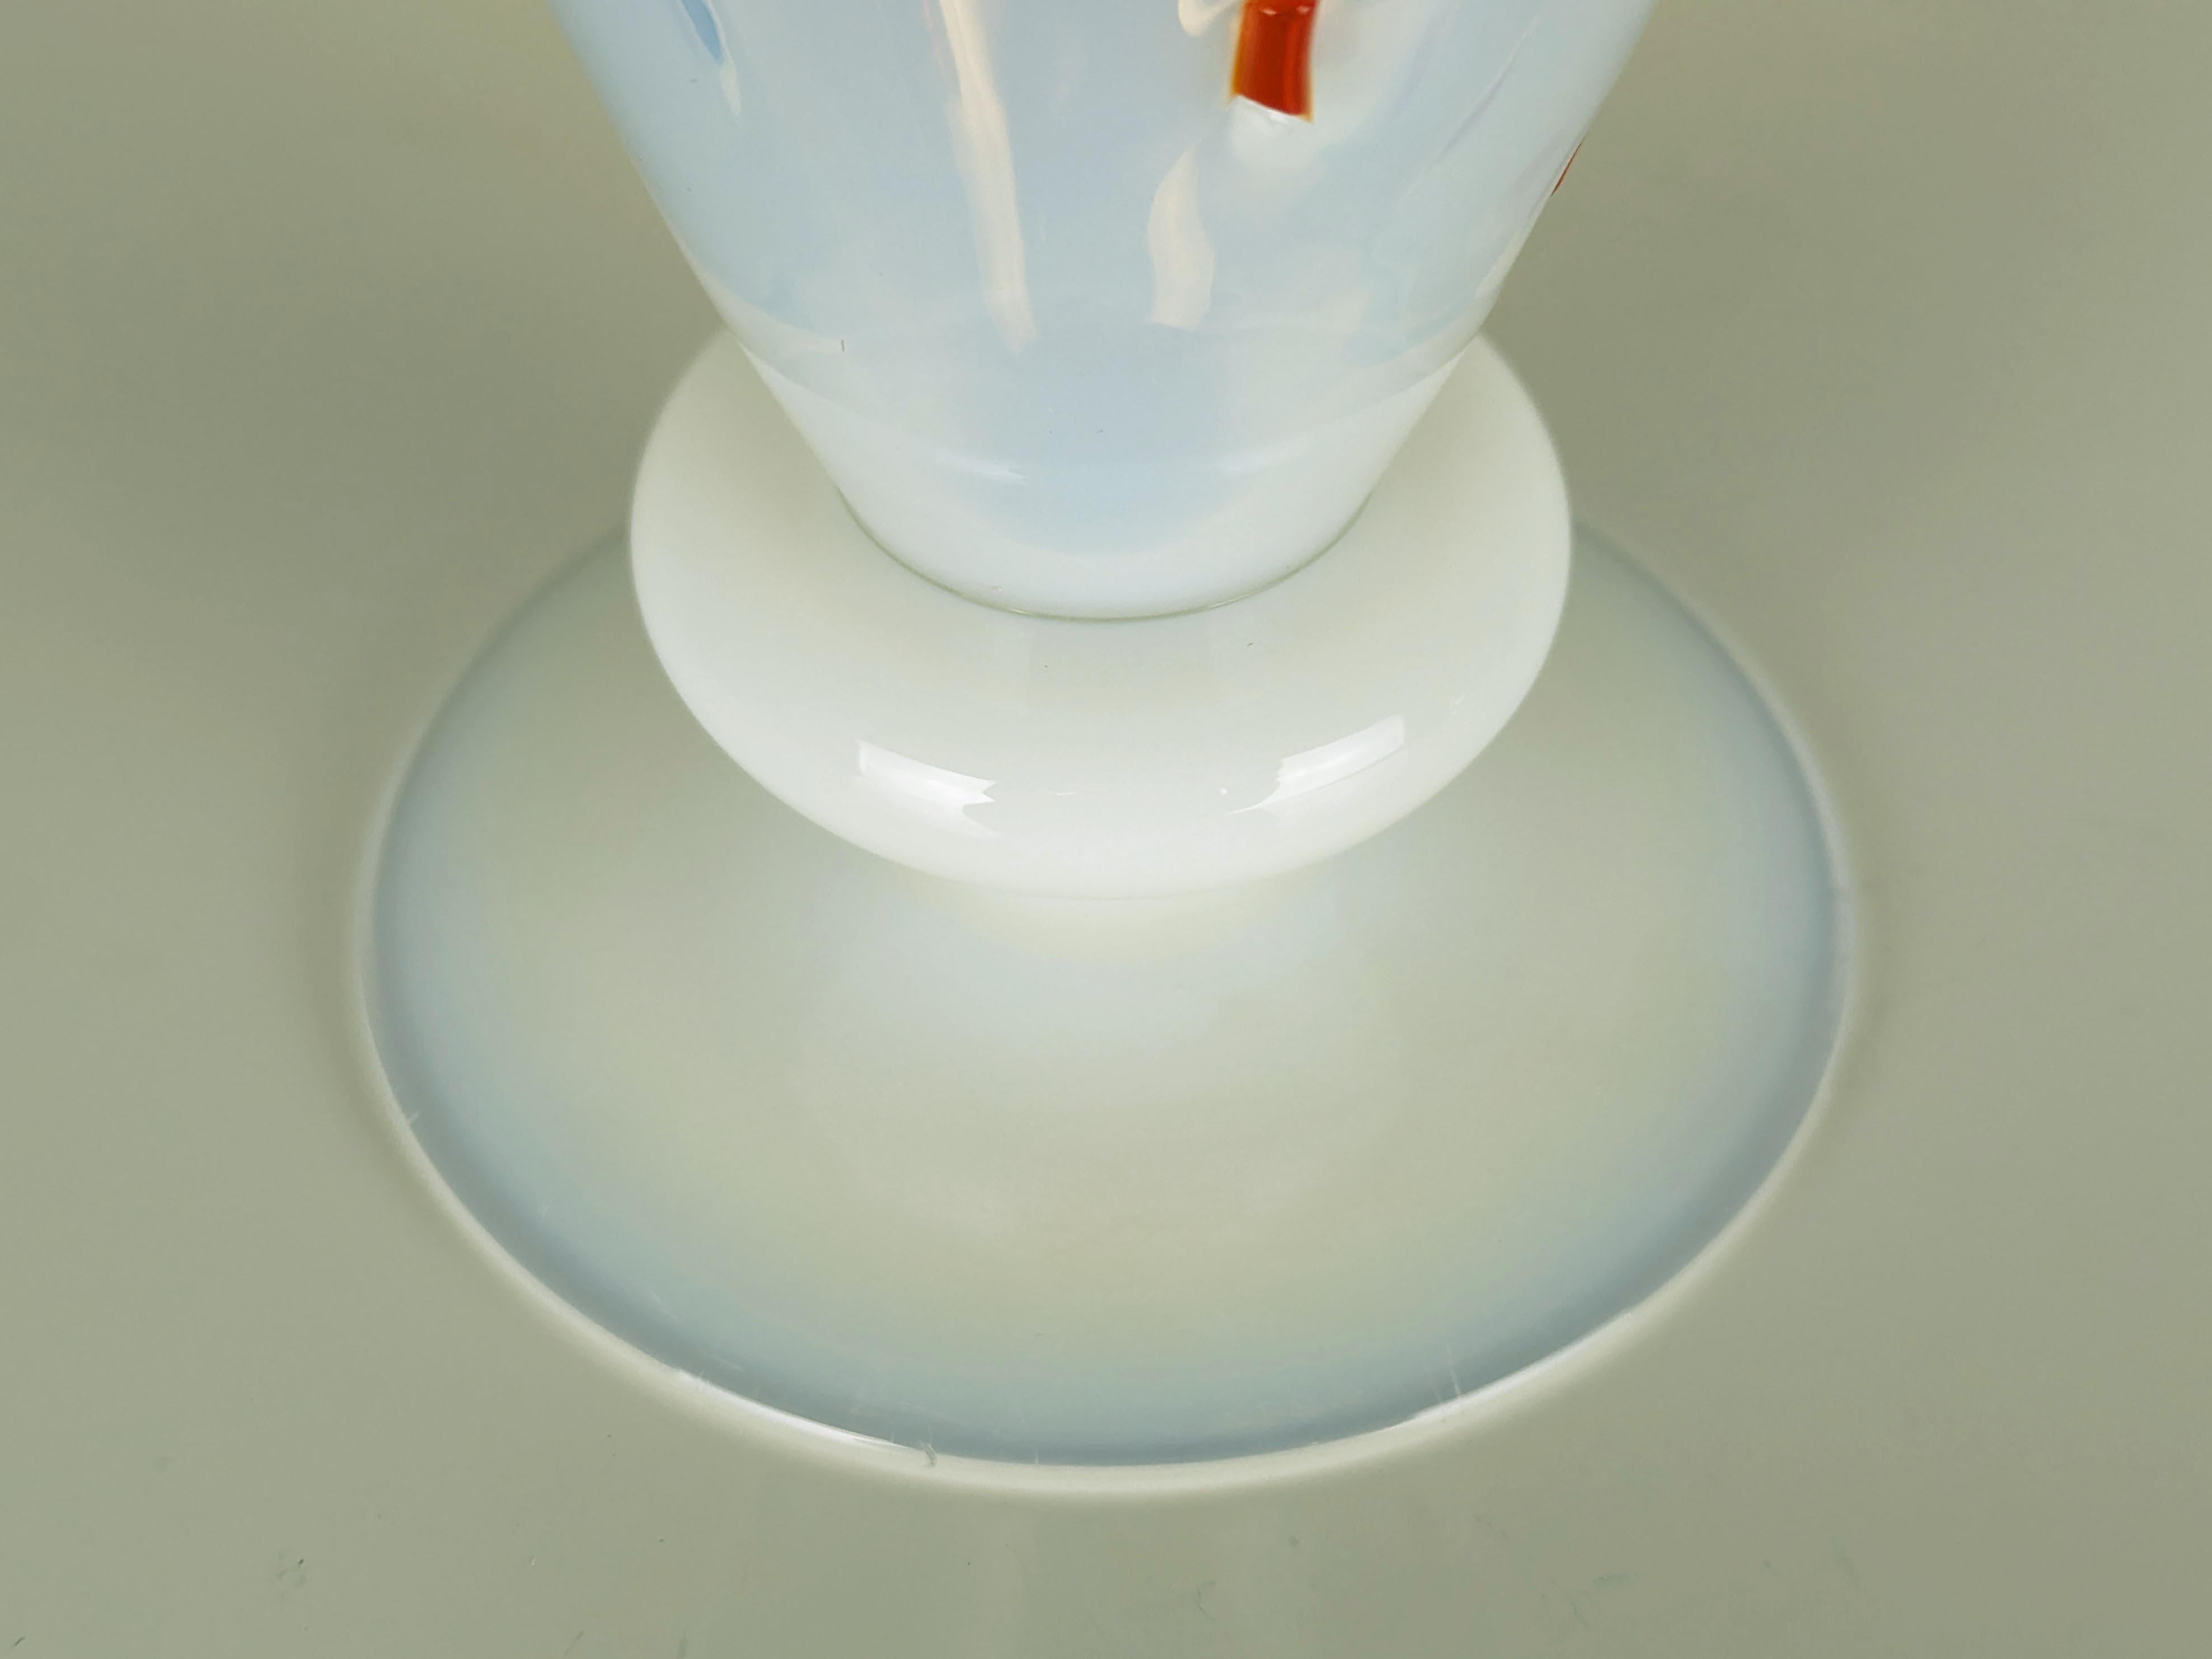 Large collectible chalice or cup in opaline Murano glass with colored inserts. signature and date engraved on the base. a visible chip on the edge as shown in the photo.